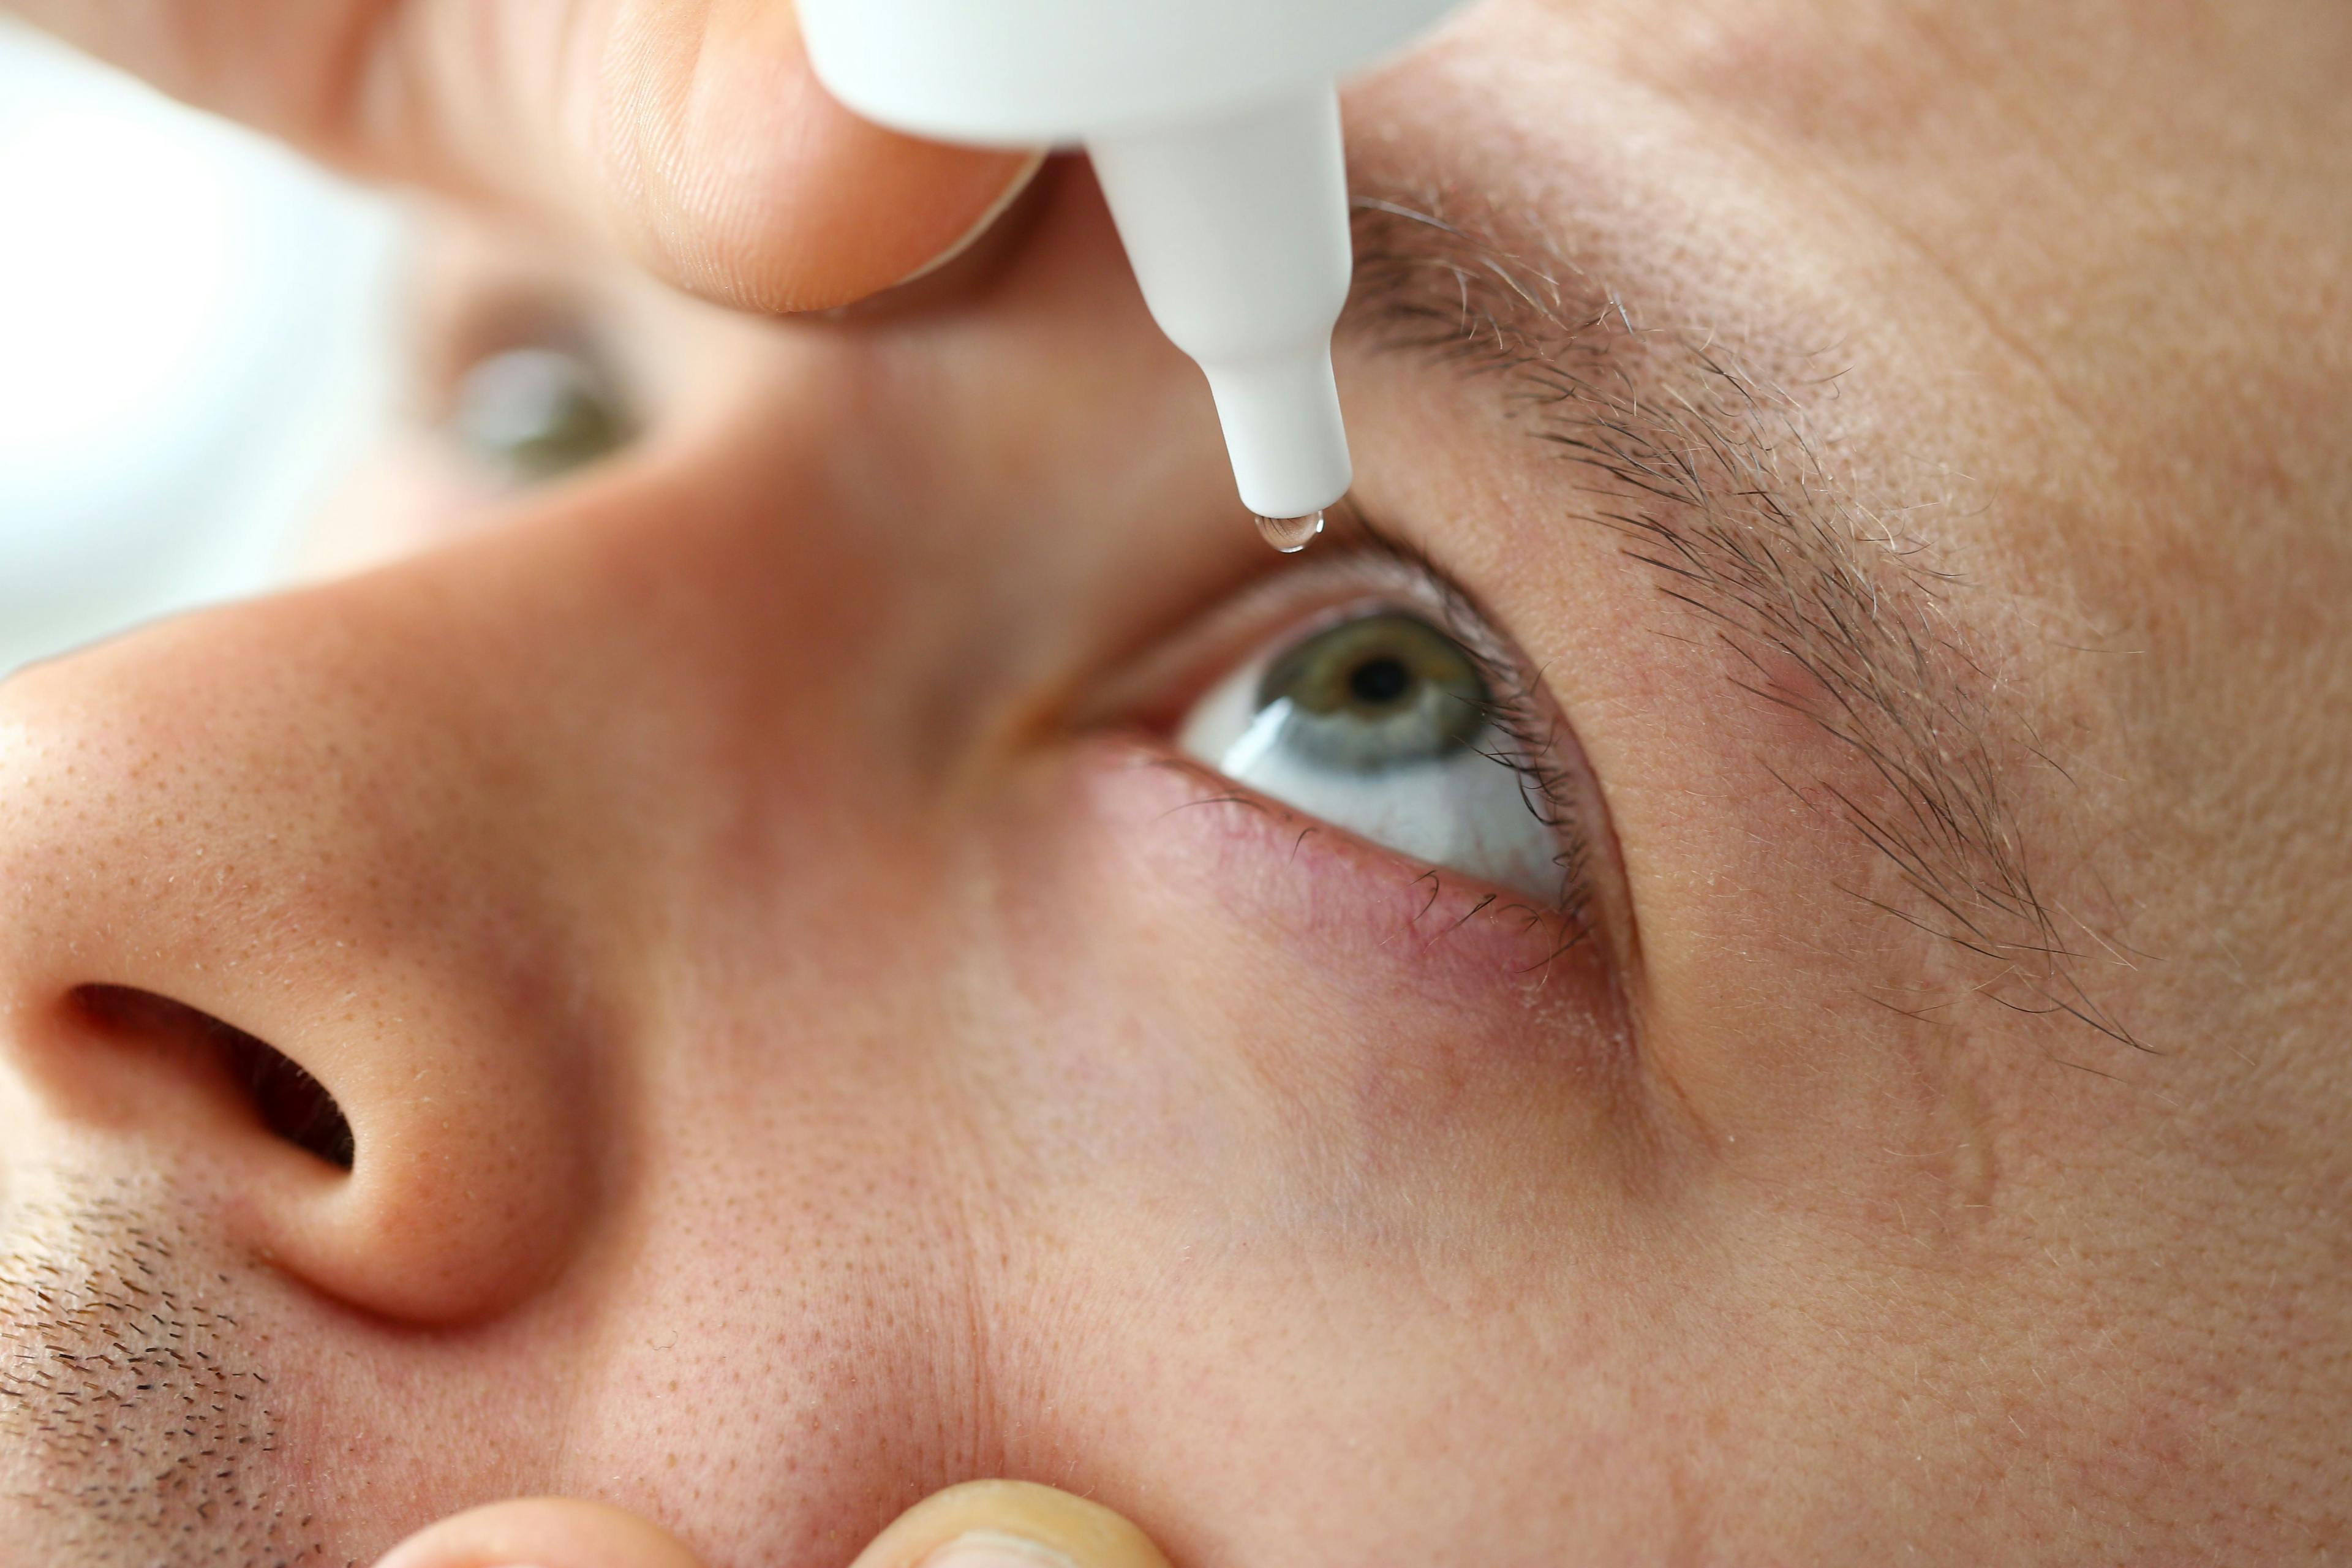 CDC sounds alarm over eye drops linked to dozens of infections, 1 death